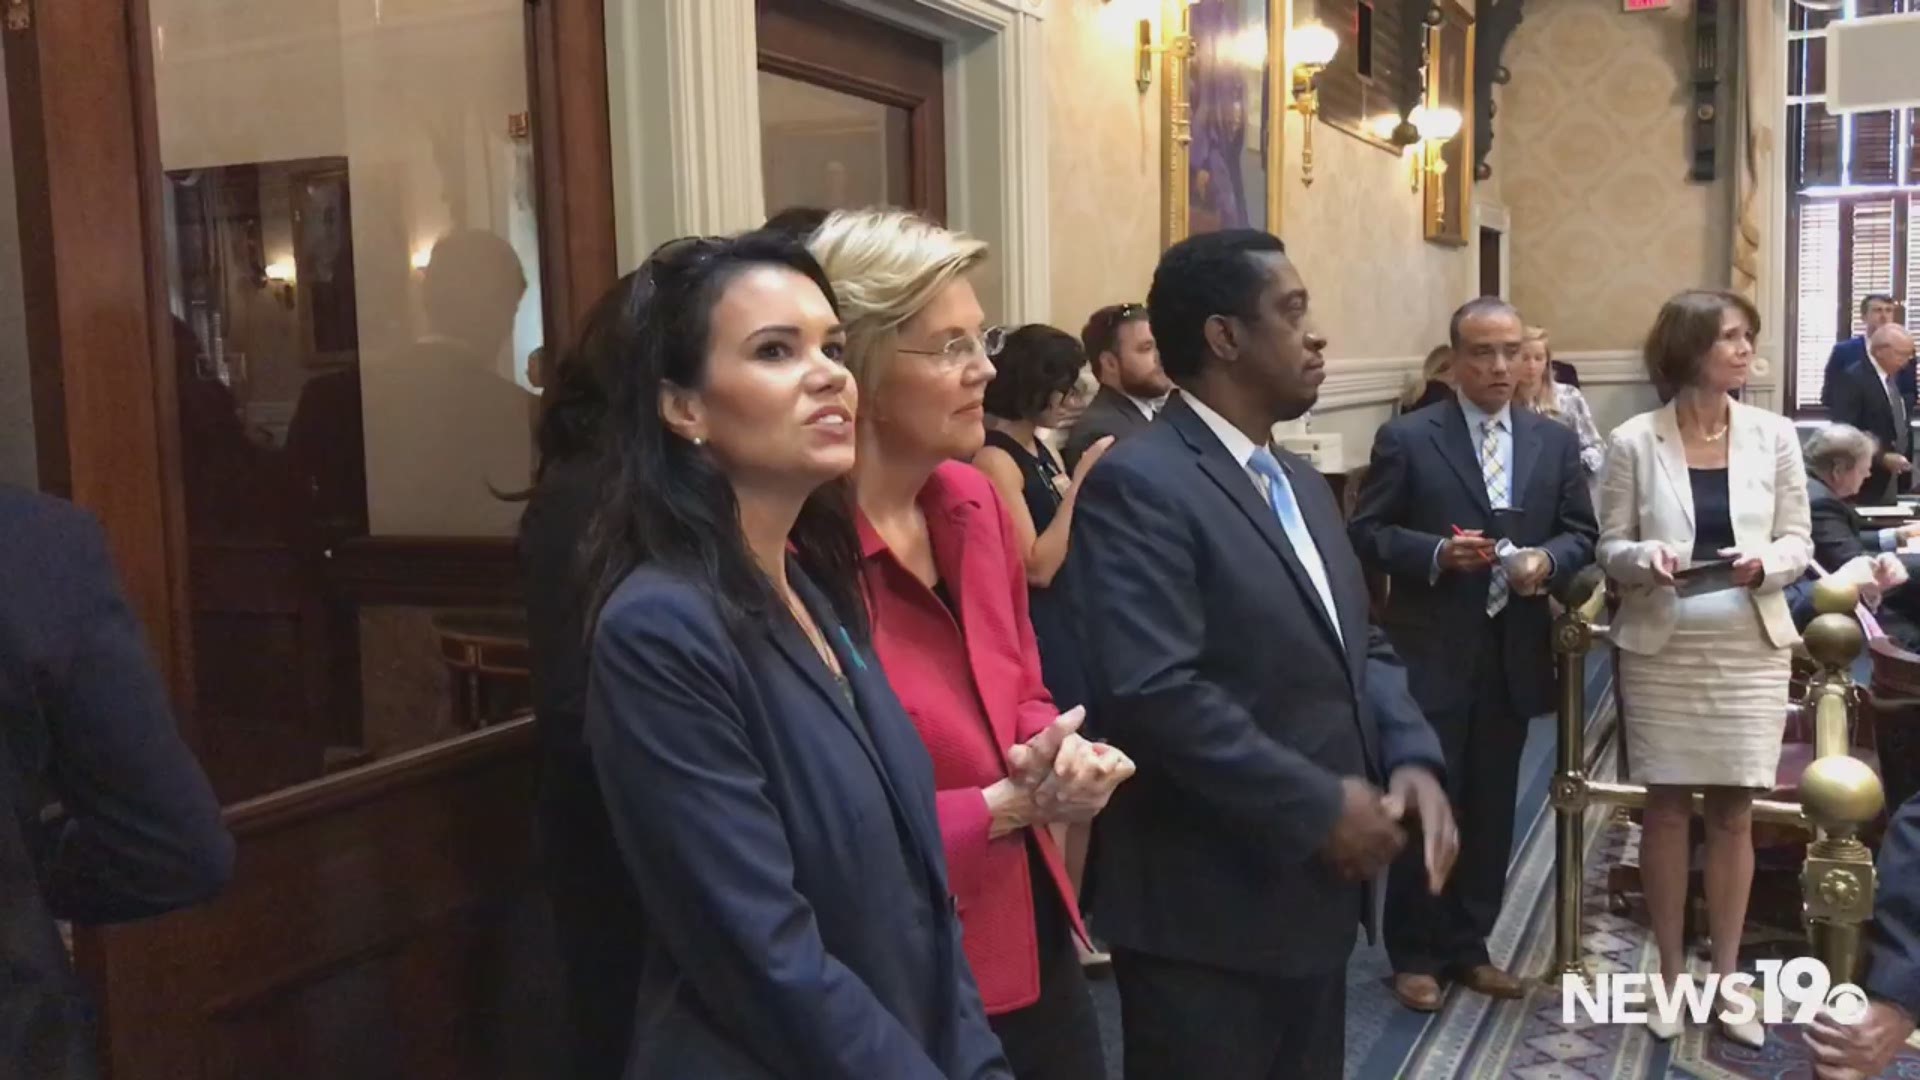 Democratic presidential hopeful Elizabeth Warren made an appearance Tuesday on the flood of the South Carolina State House.